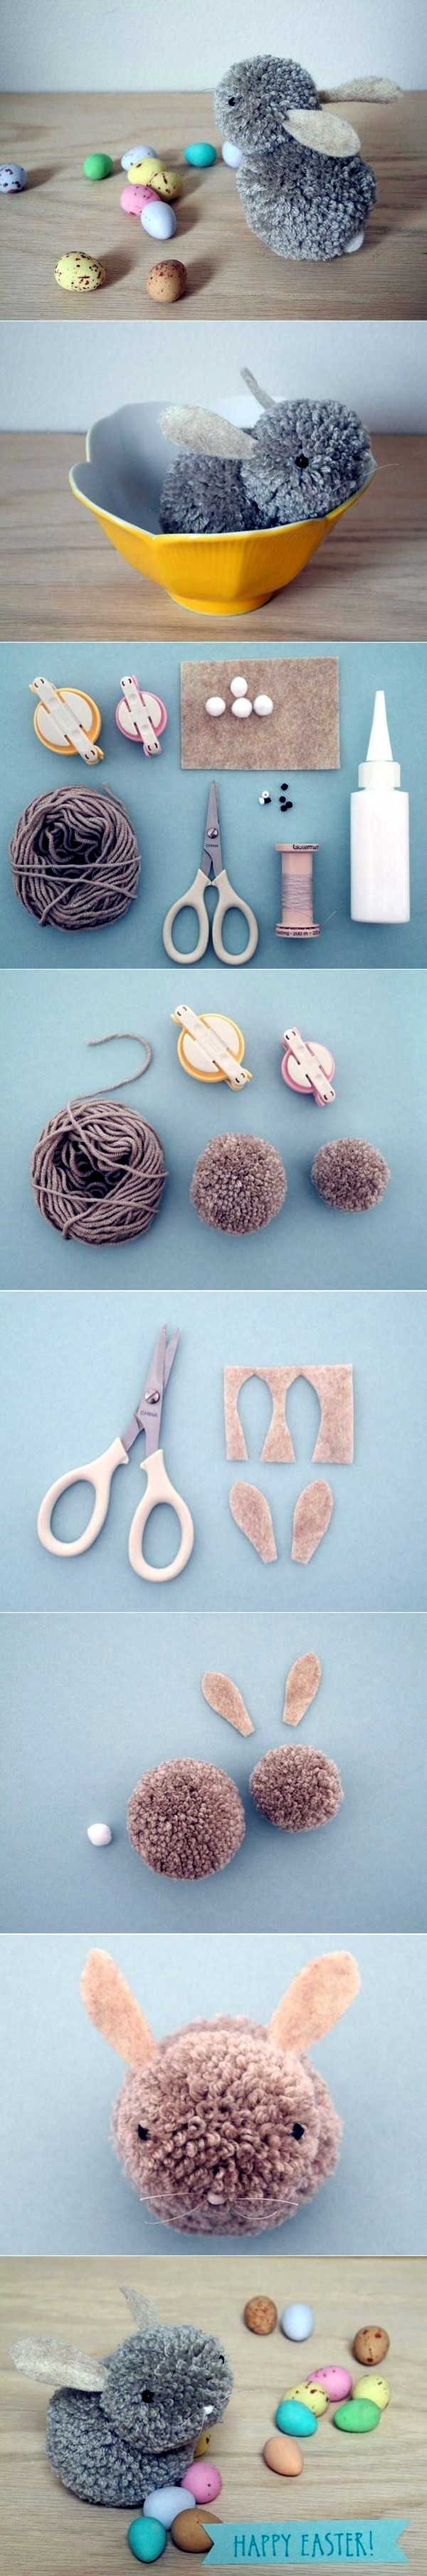 Quick and So Useful DIY's to Learn (33)